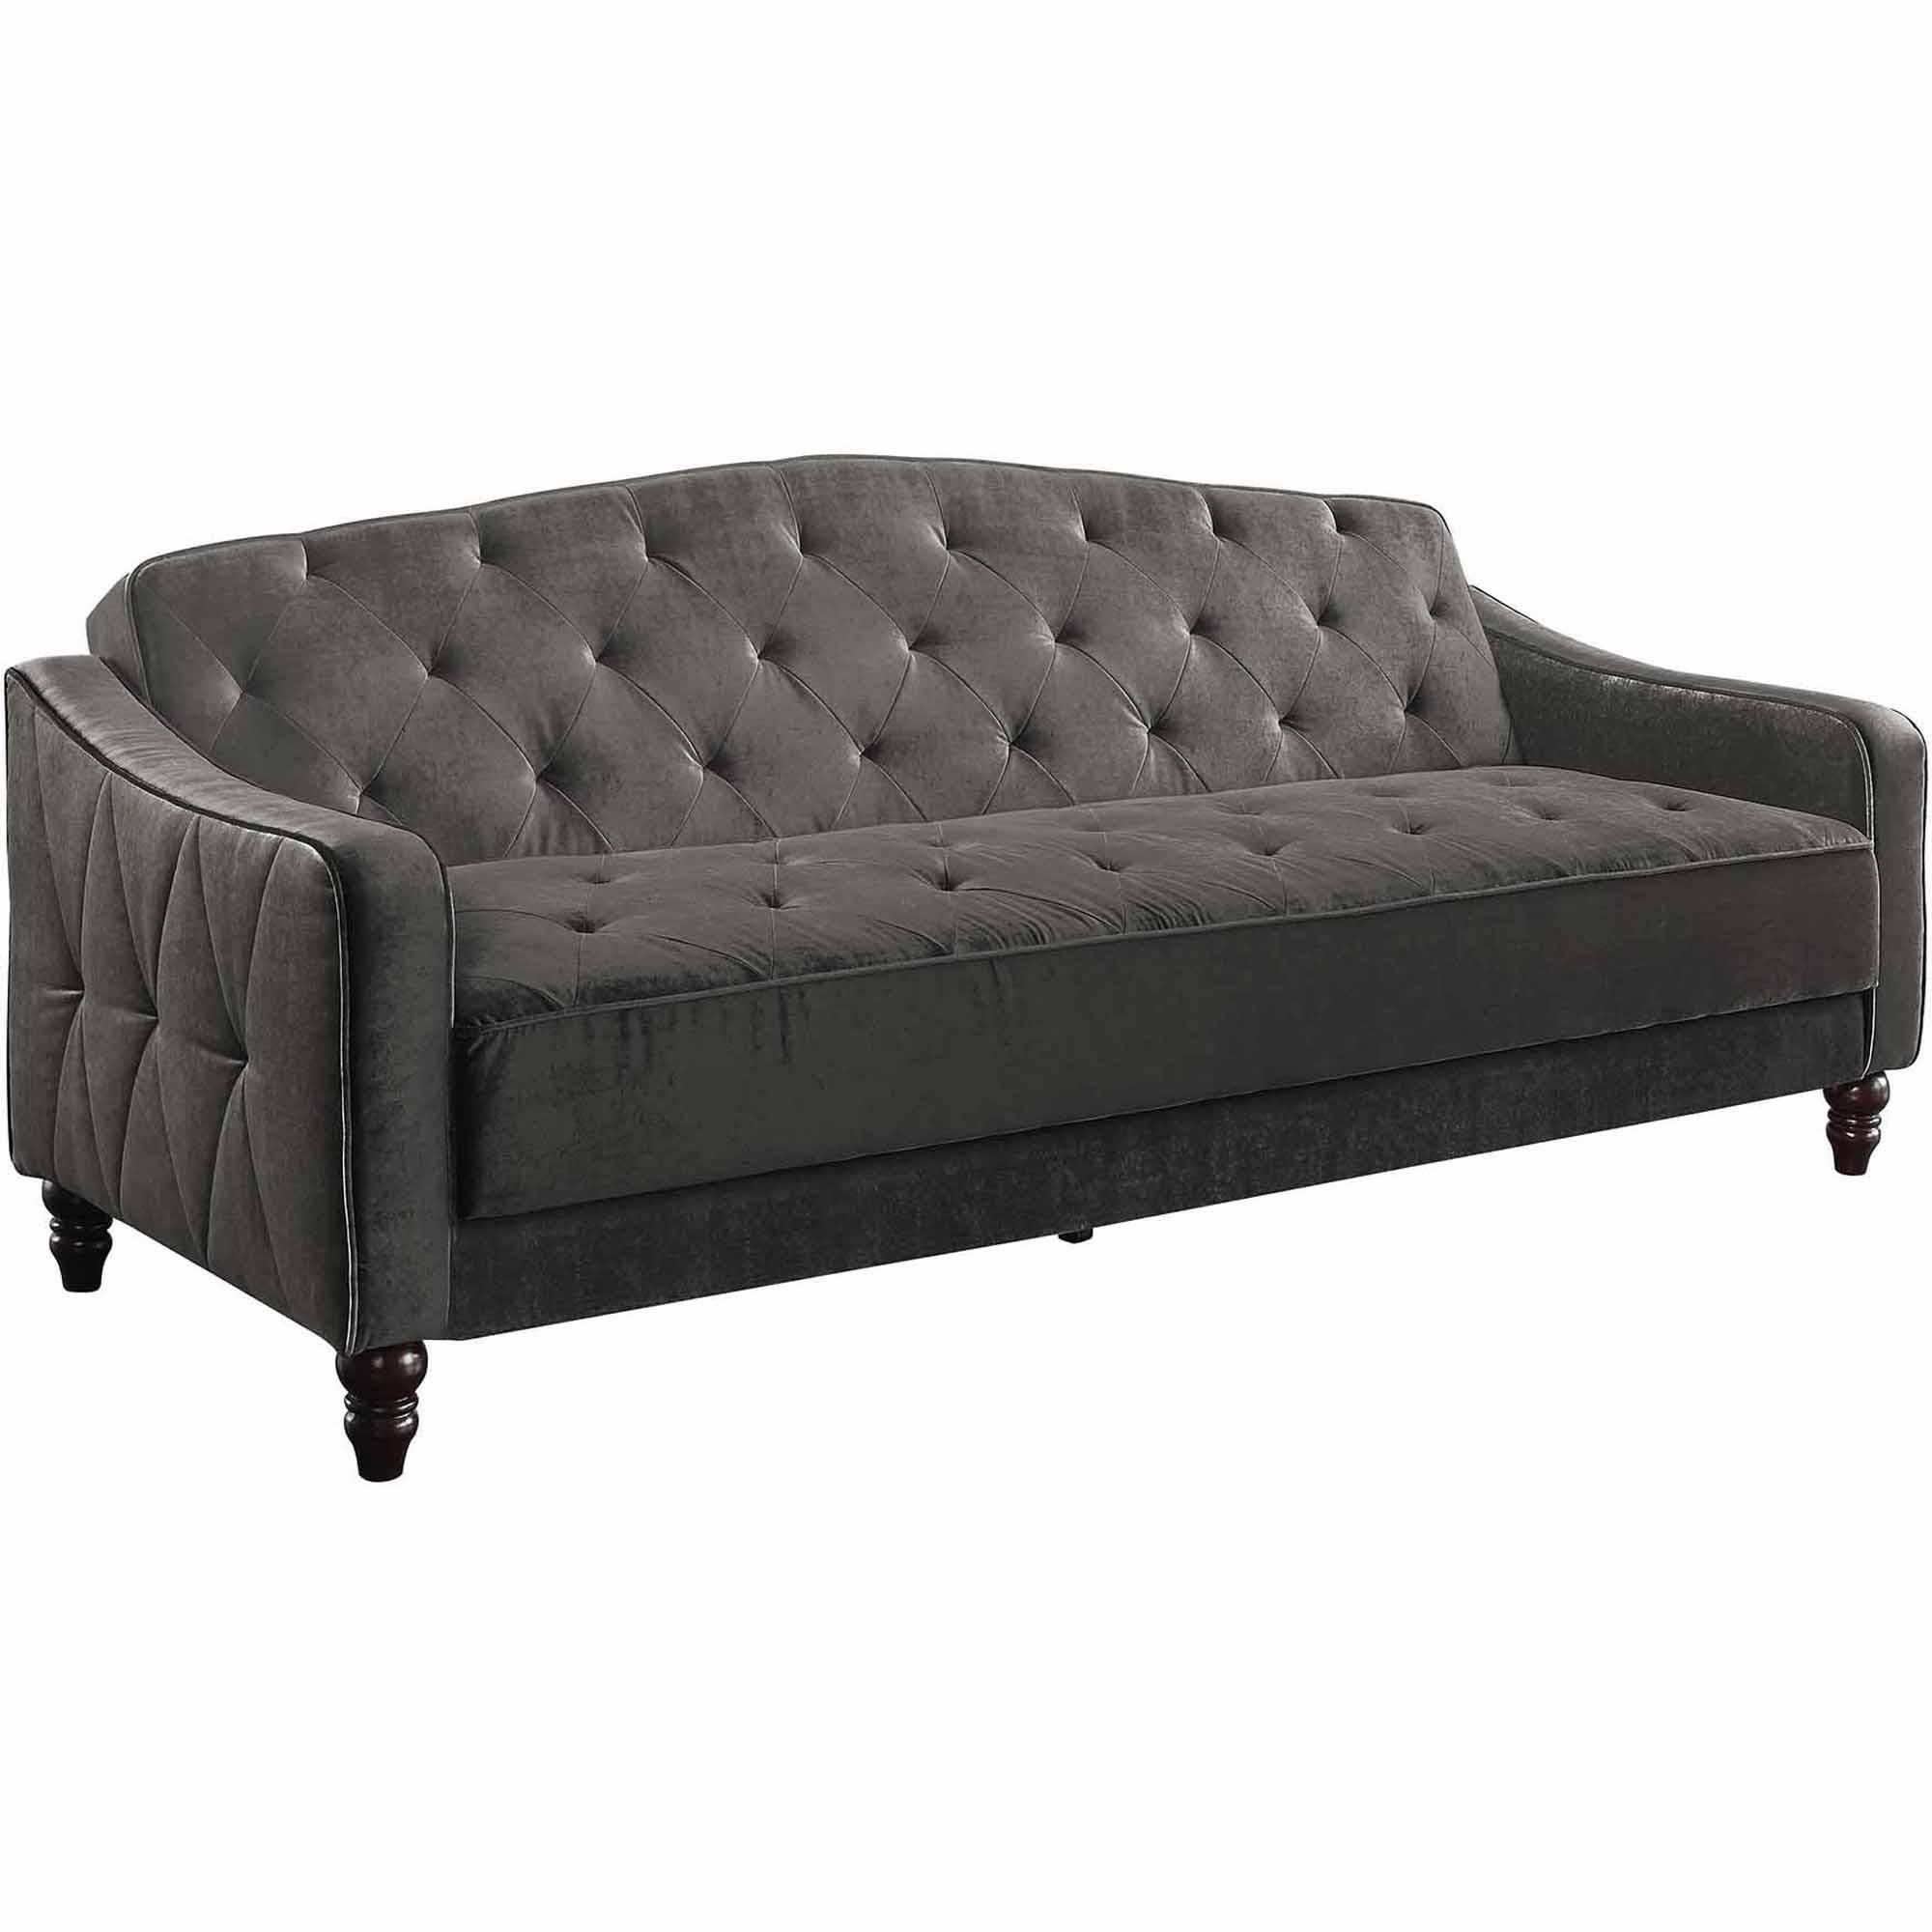 Affordable Tufted Sofa Perfectly In5 | Umpsa 78 Sofas In Affordable Tufted Sofas (View 5 of 20)